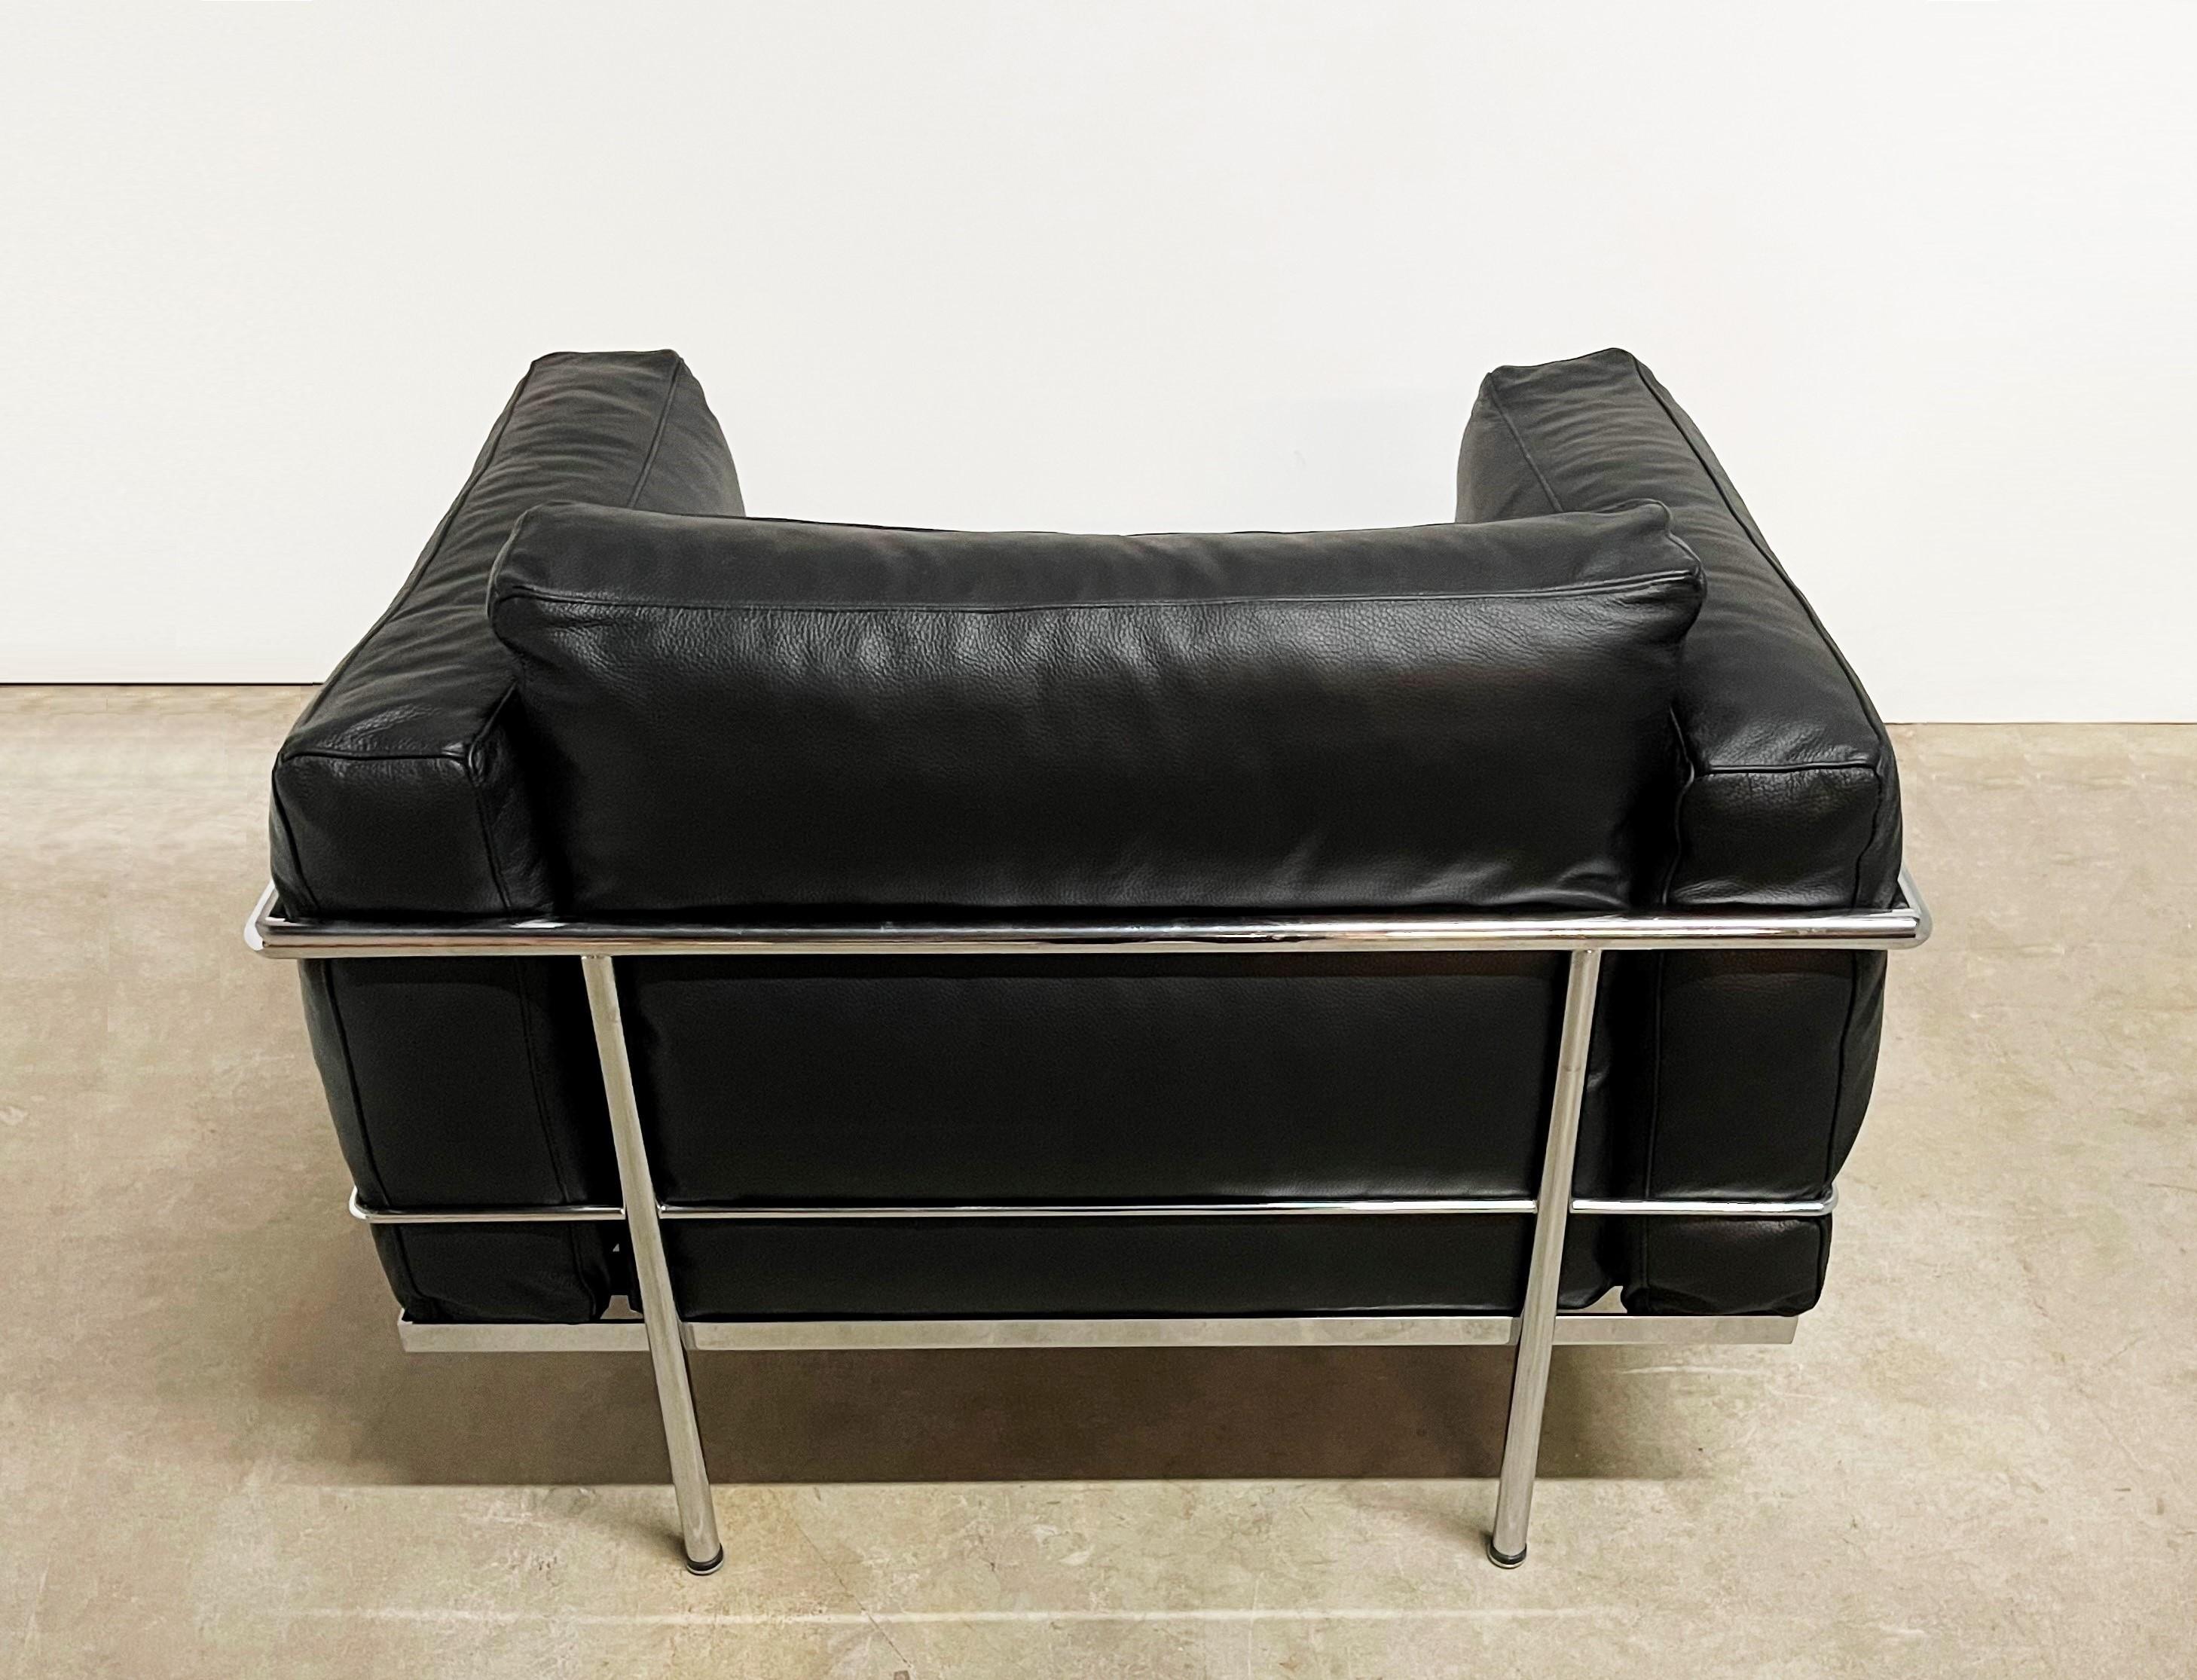 Pierre Jeanneret, Charlotte Perriand & Le Corbusier Grand Comfort Loungesessel im Angebot 2